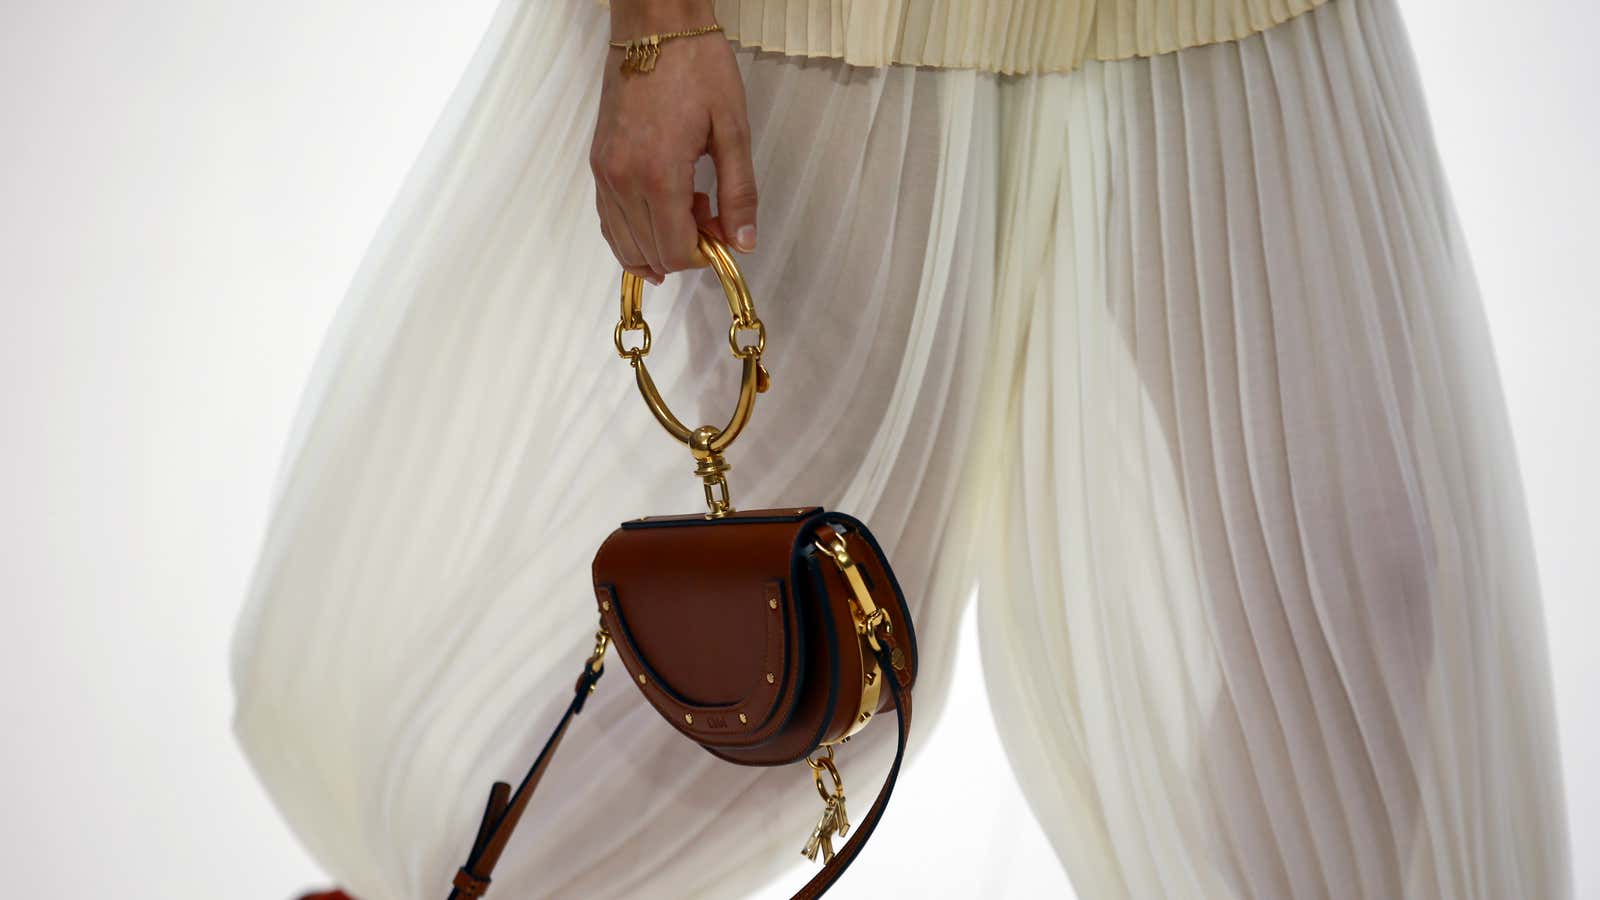 Chloé signatures: High-end handbags and filmy layers.